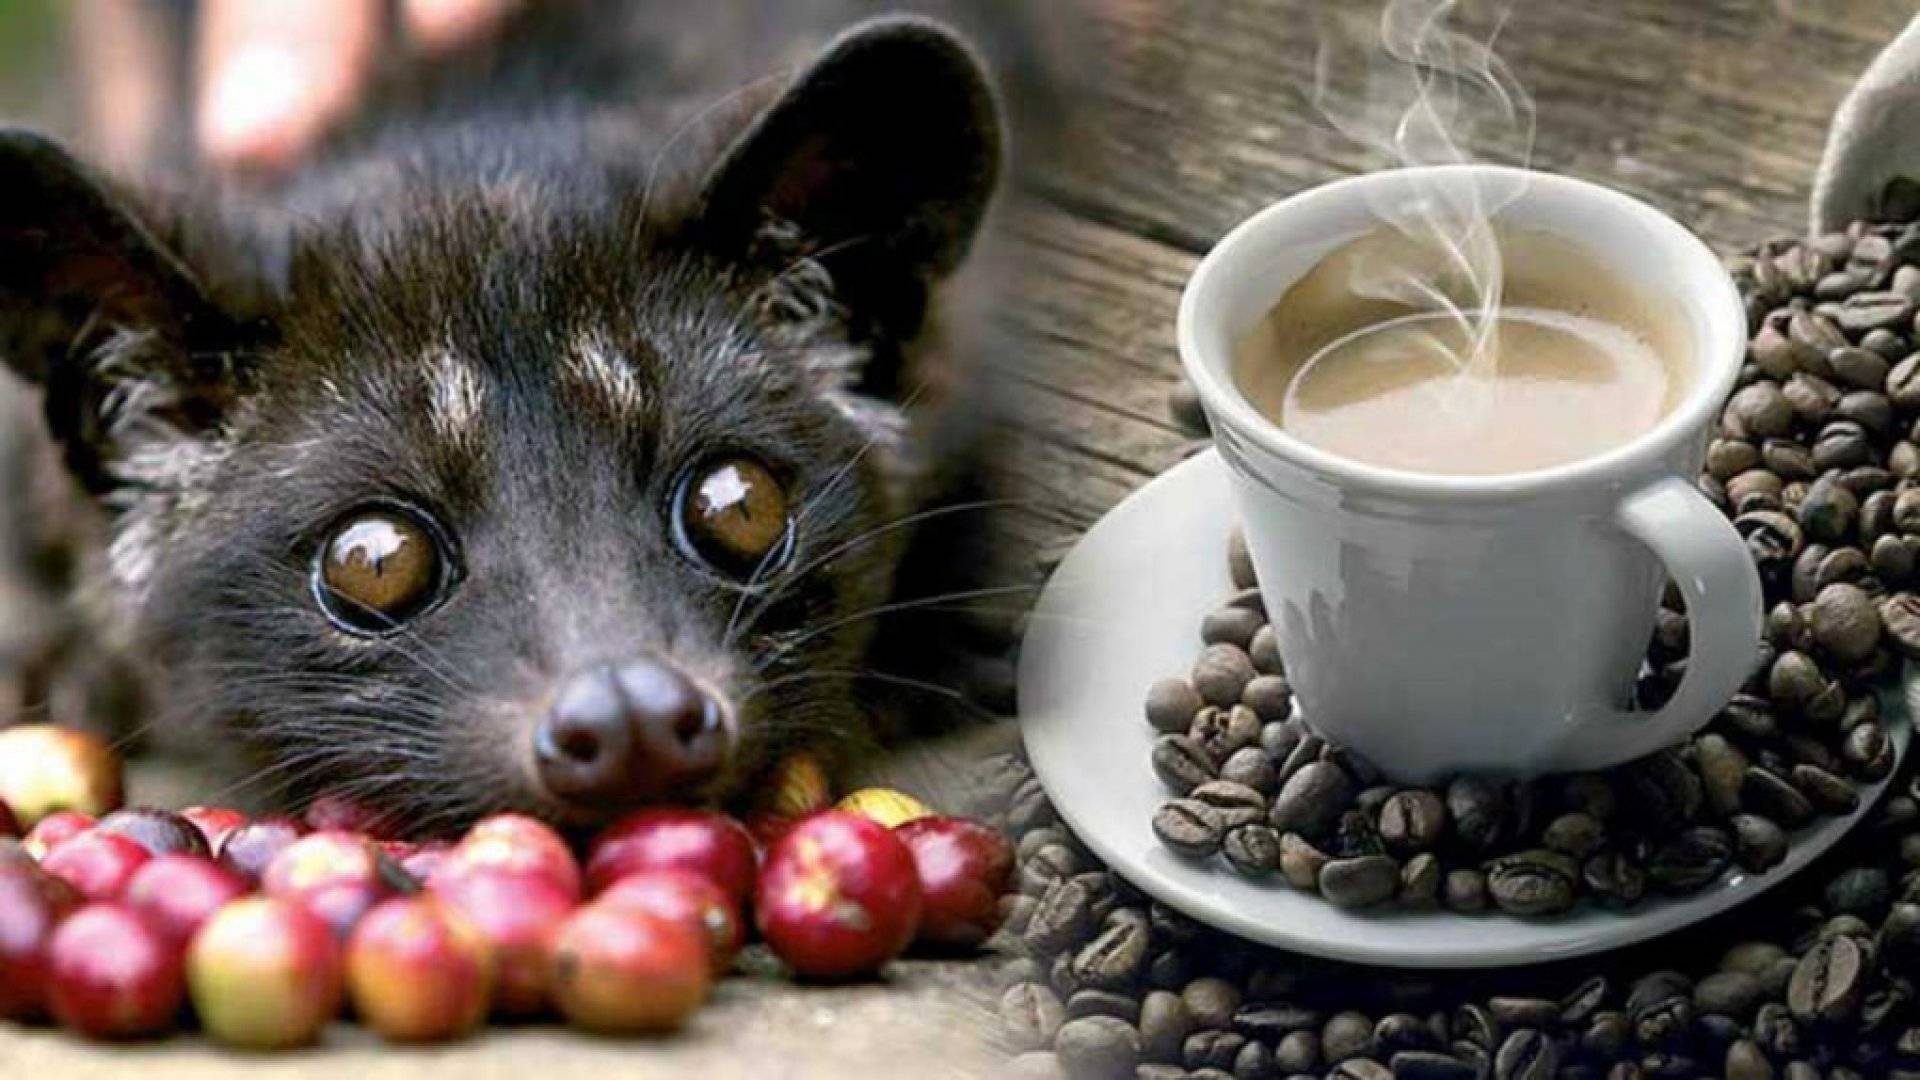 Vietnamese Kopi Luwak – The Most Expensive Coffee In The World